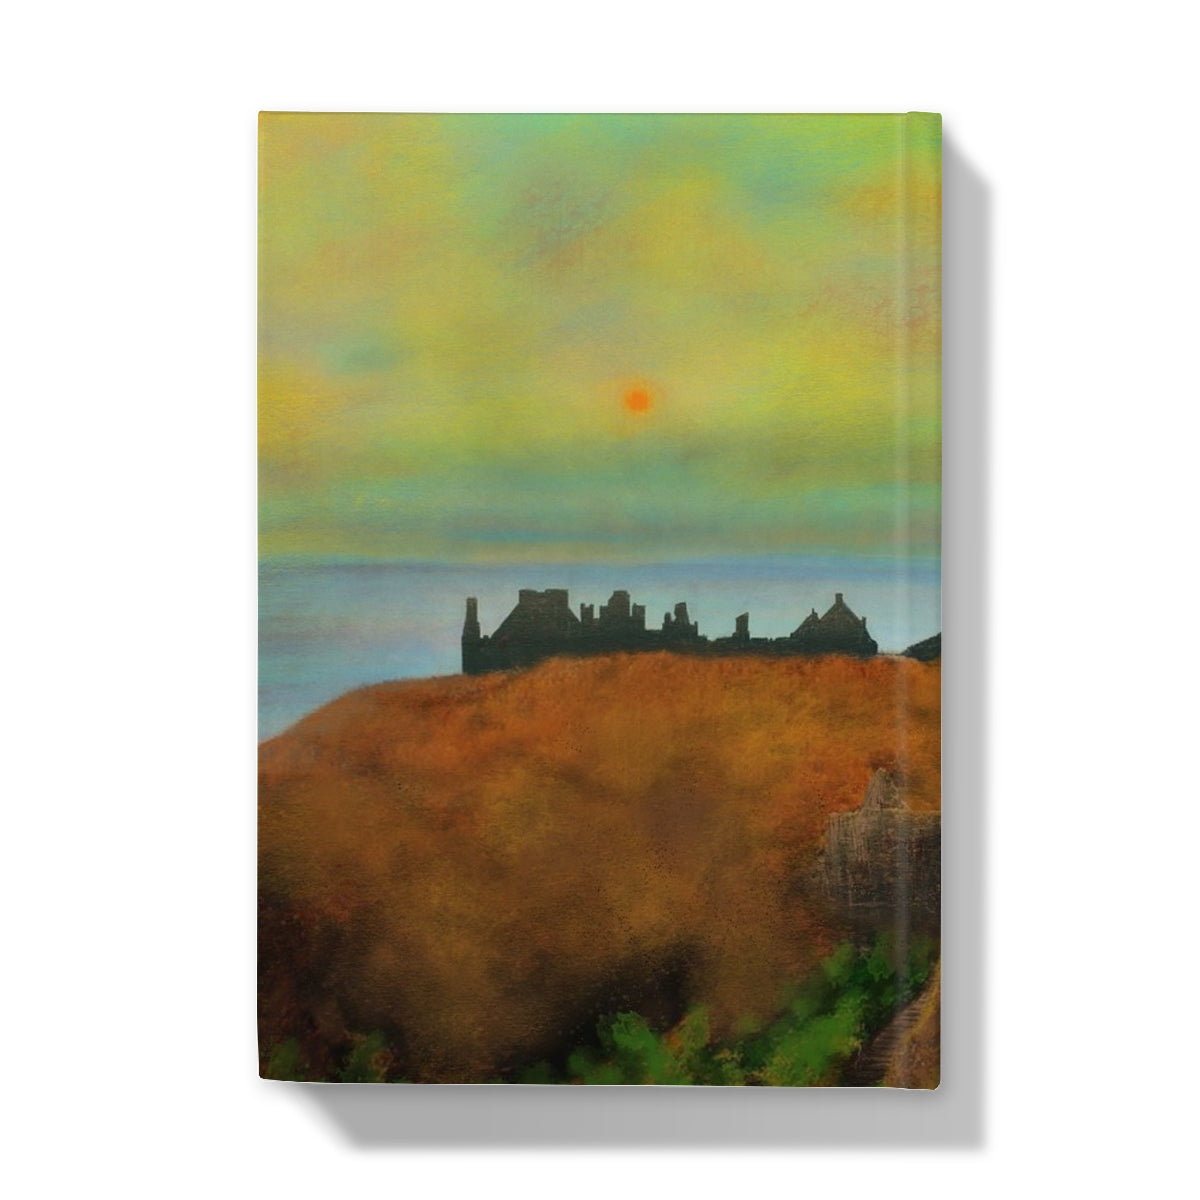 Dunnottar Castle Art Gifts Hardback Journal-Journals & Notebooks-Historic & Iconic Scotland Art Gallery-Paintings, Prints, Homeware, Art Gifts From Scotland By Scottish Artist Kevin Hunter